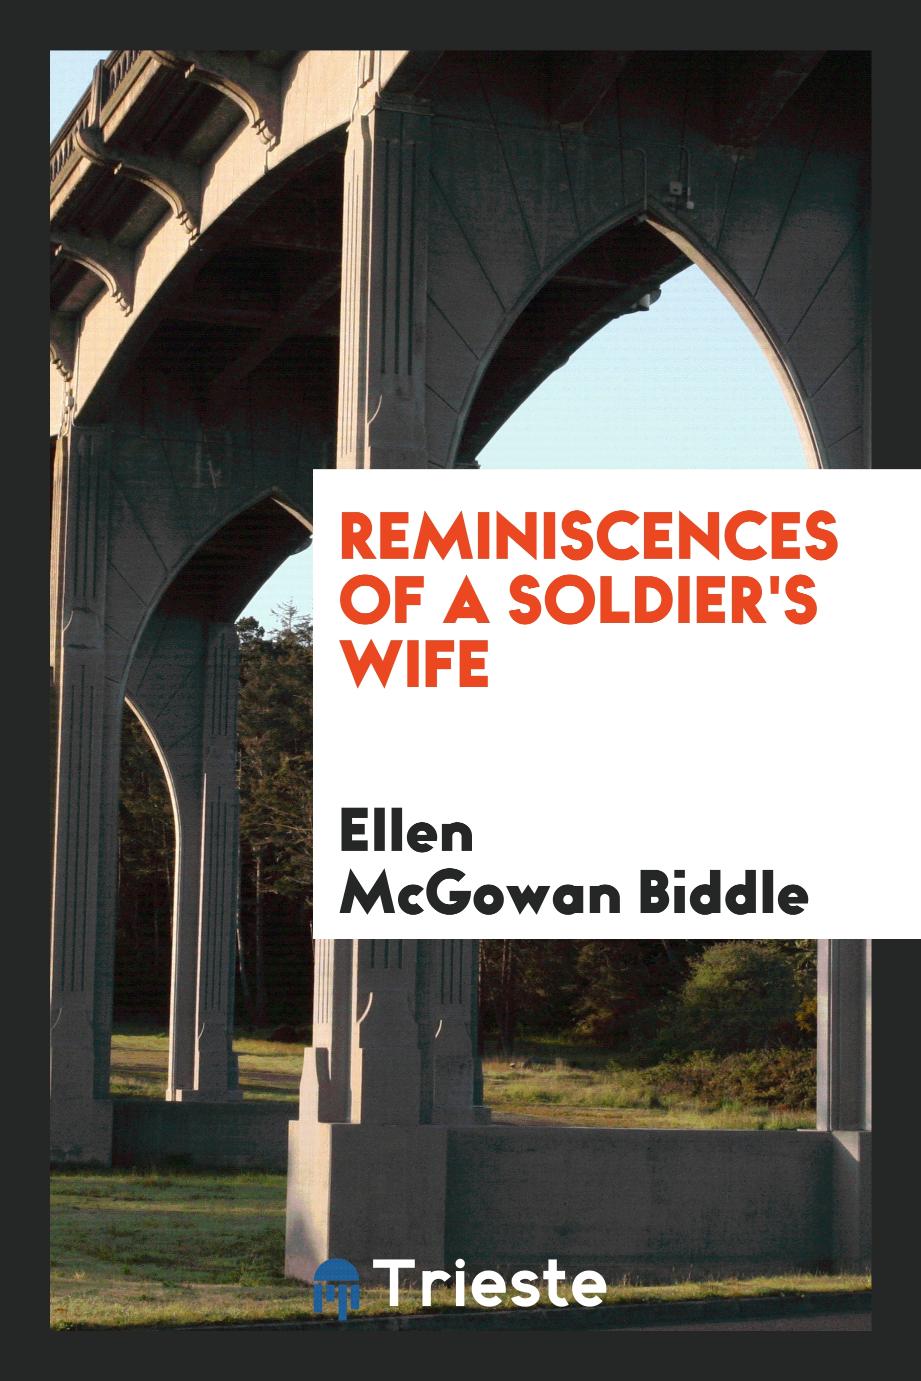 Reminiscences of a soldier's wife